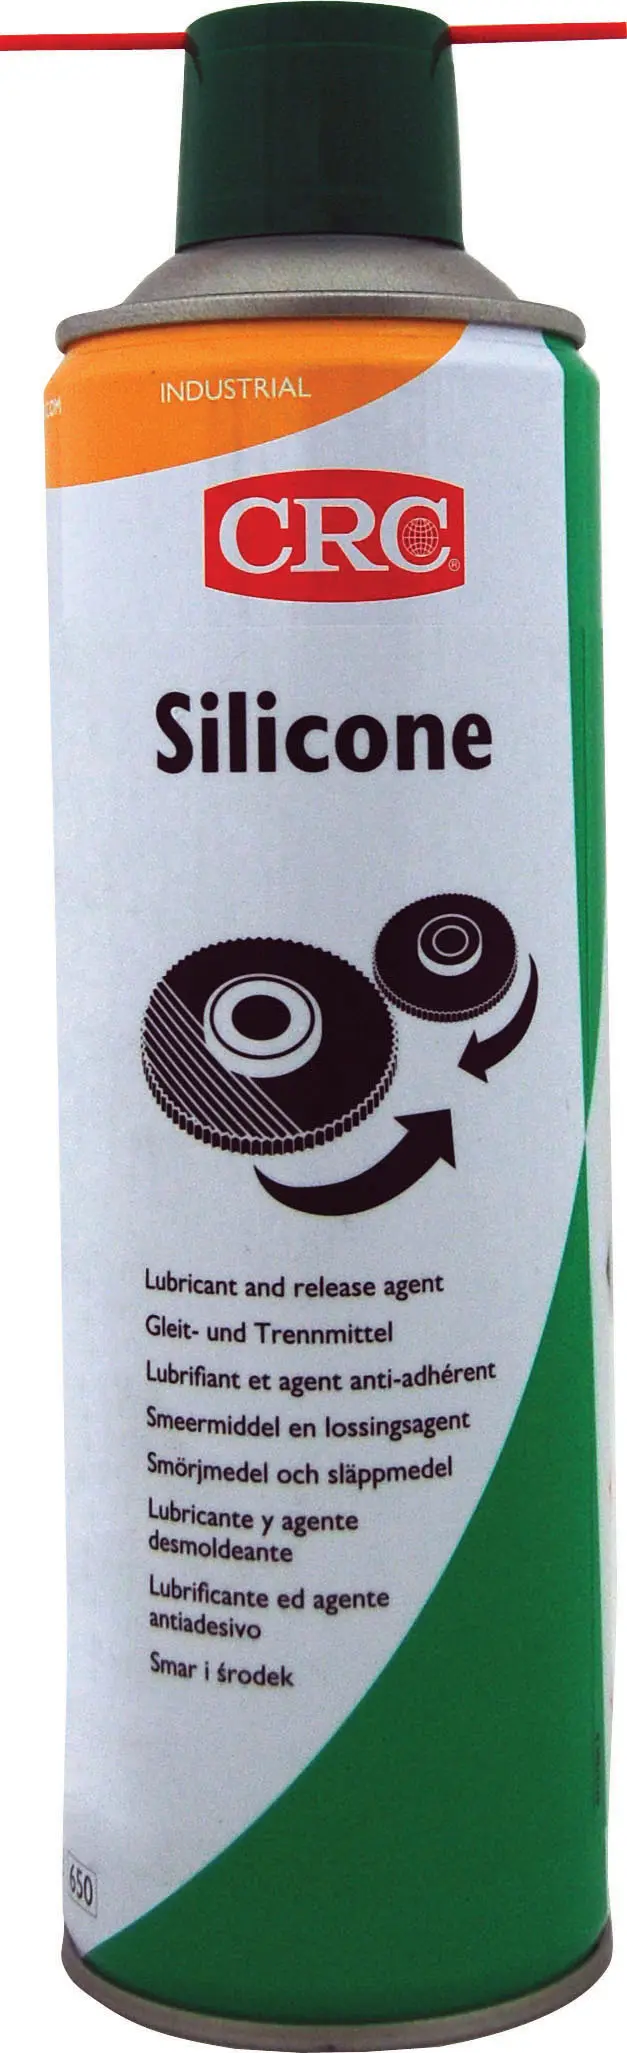 Silicone ind spray